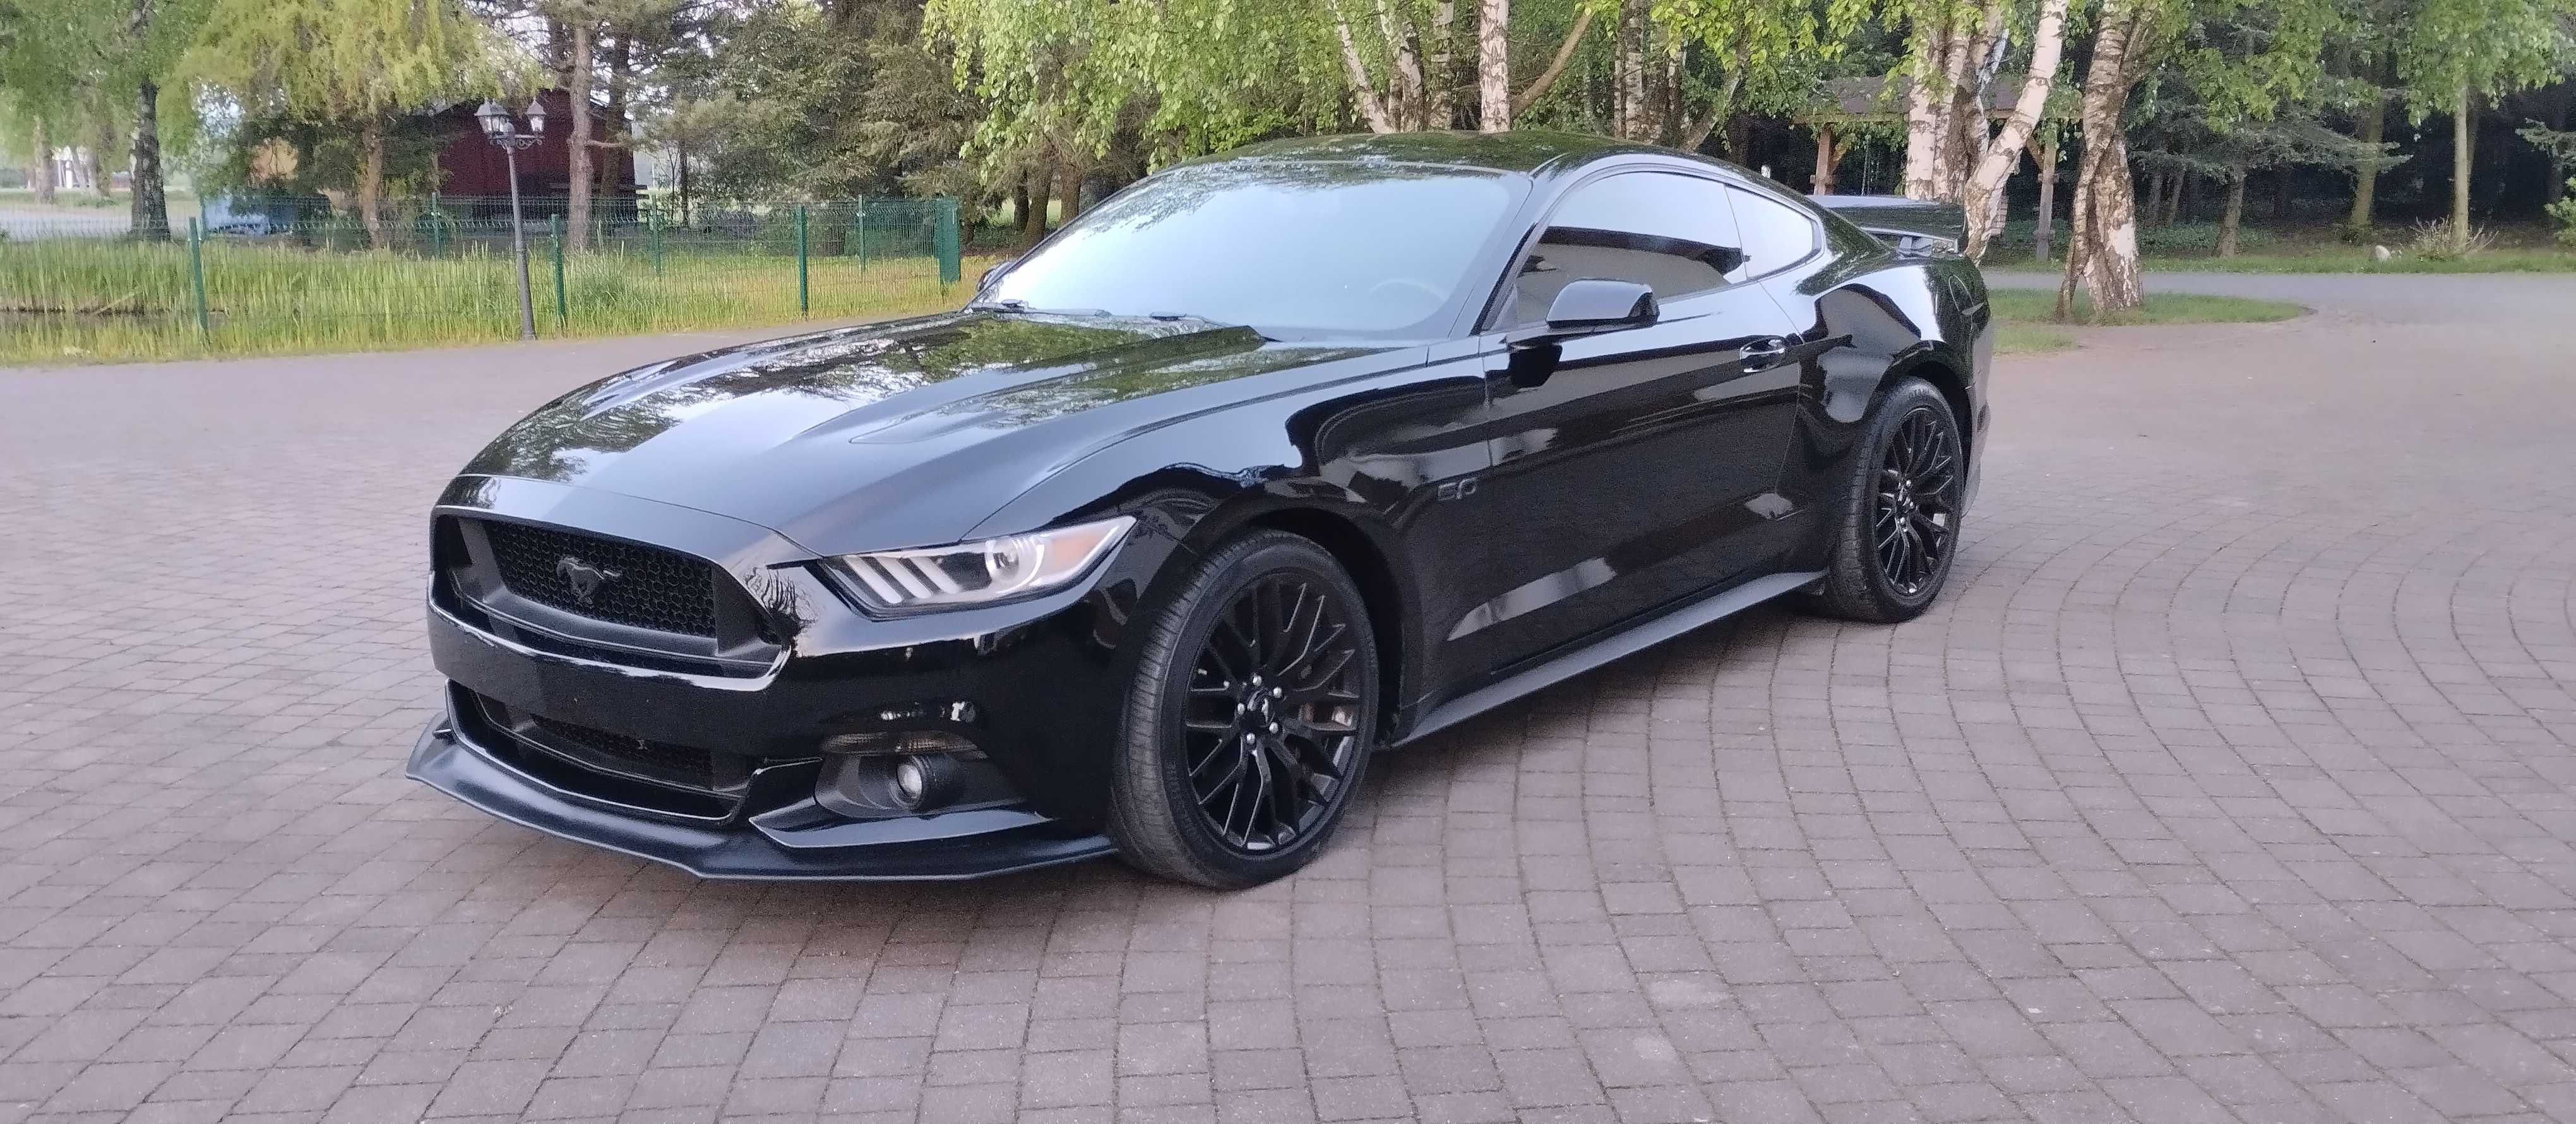 Ford Mustang VI 2015 5.0 wydech dolot Roush Manual